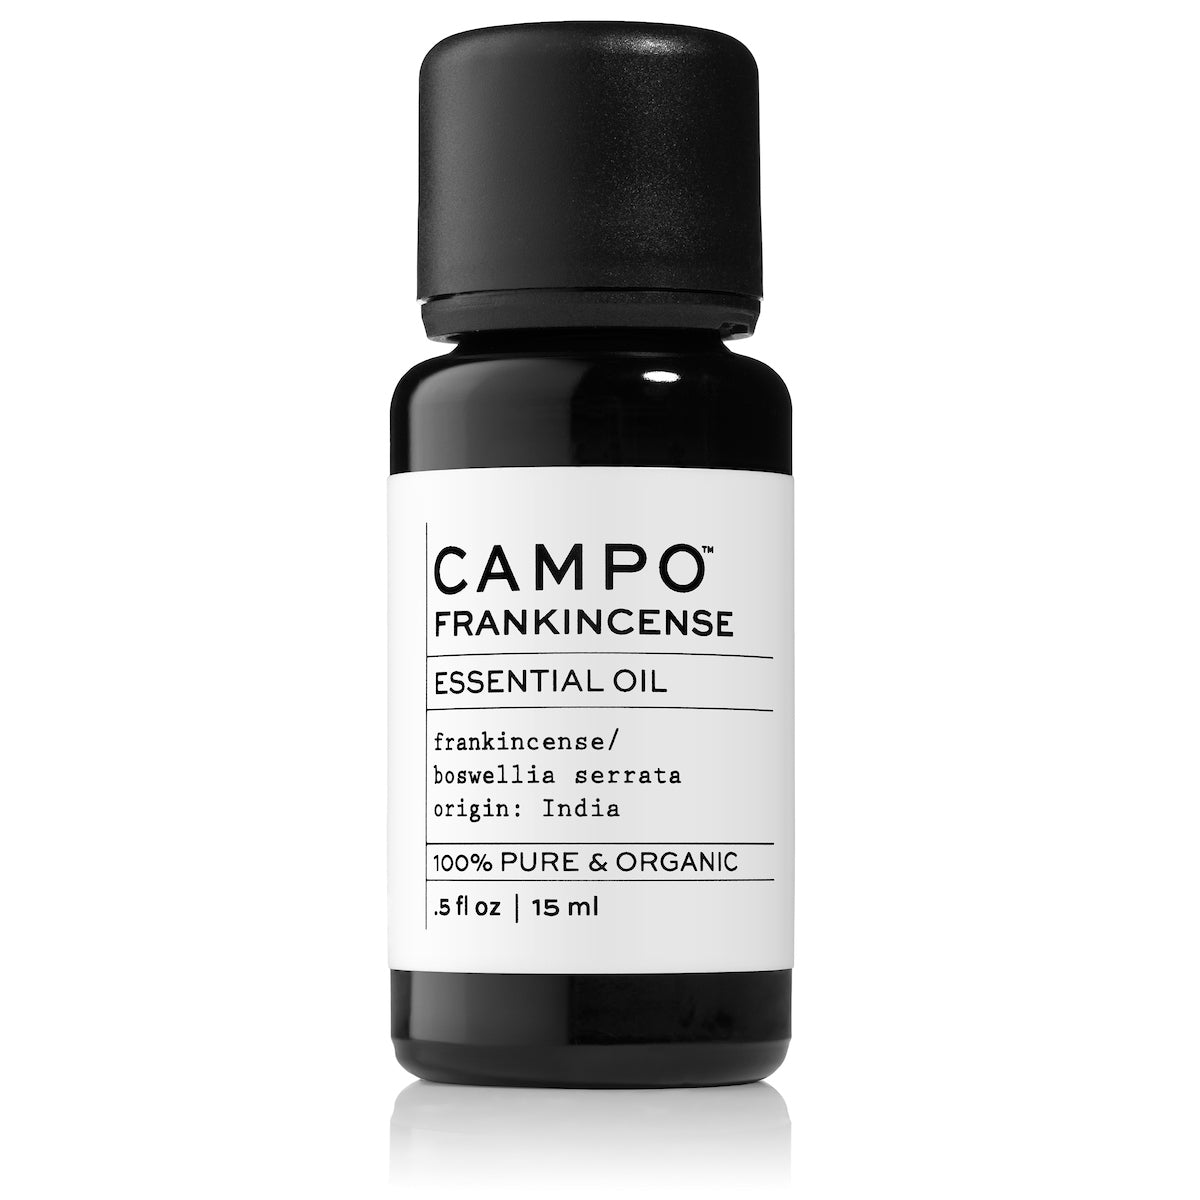 Campo Beauty FRANKINCENSE Blend 15 ml Essential Oil. Frankincense/Frankincense Boswellia Serrata